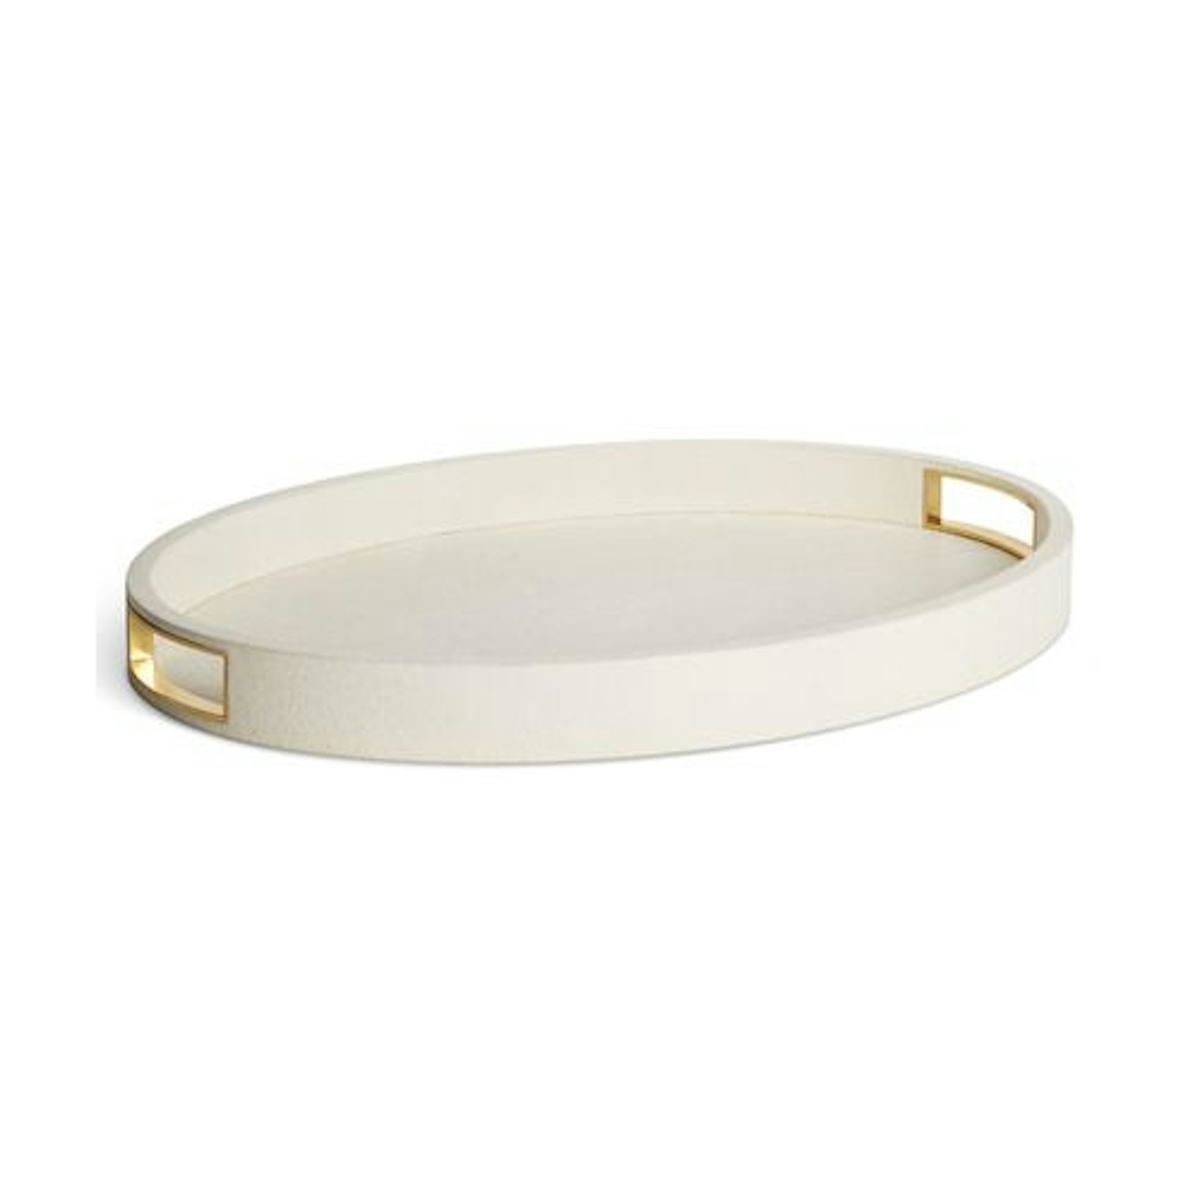 Cream Shagreen Cocktail Tray - 21 Best Decorative Trays To Buy For Your Tabletop - LuxDeco.com